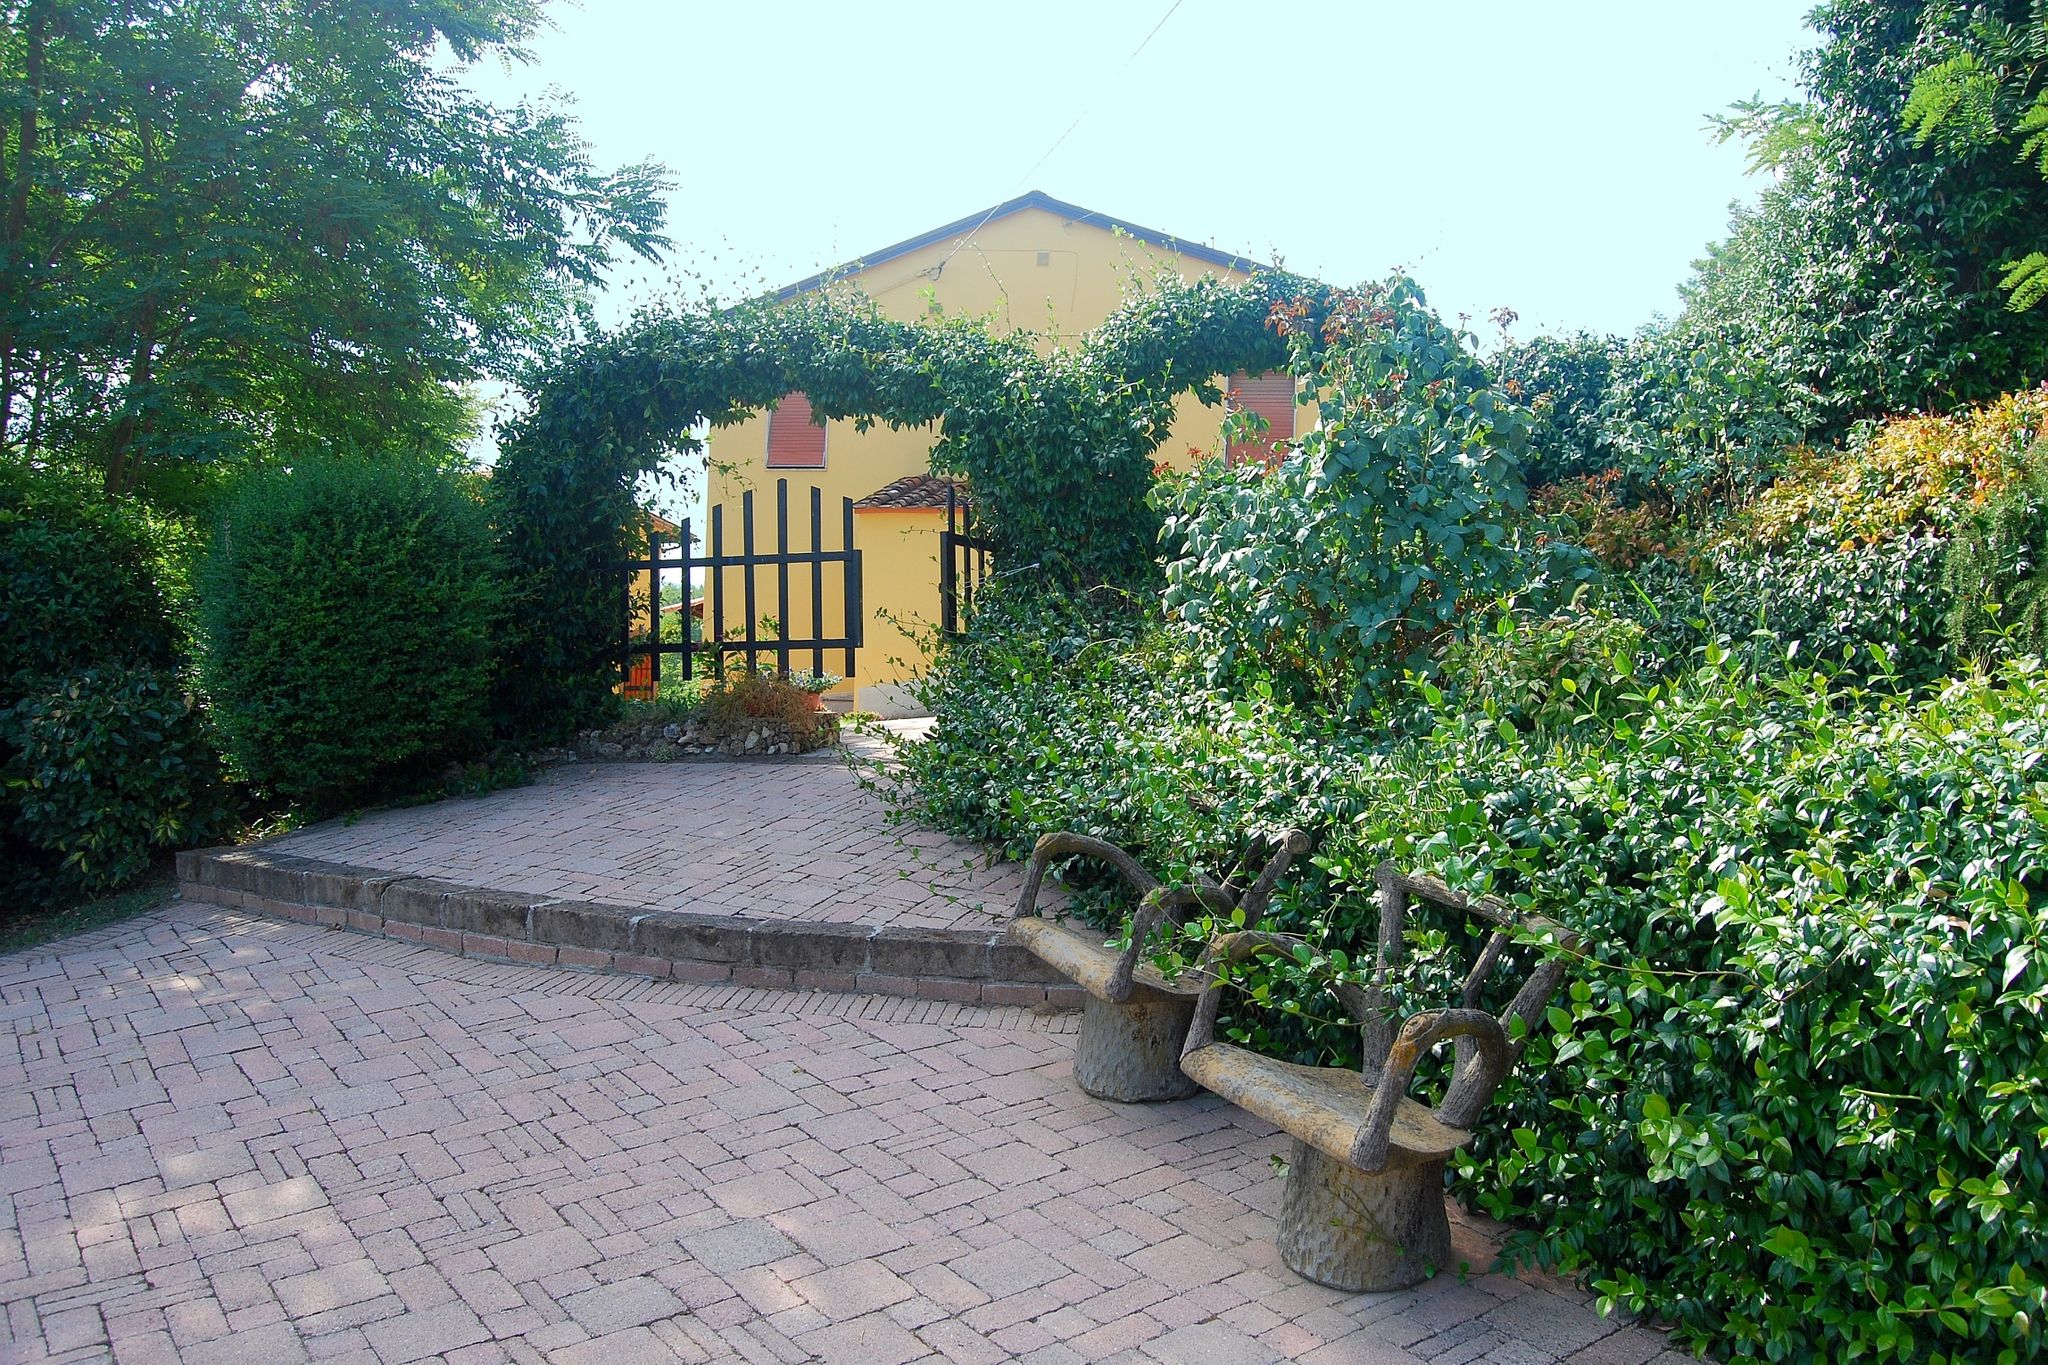 Charming holiday home between Florence and Pisa.